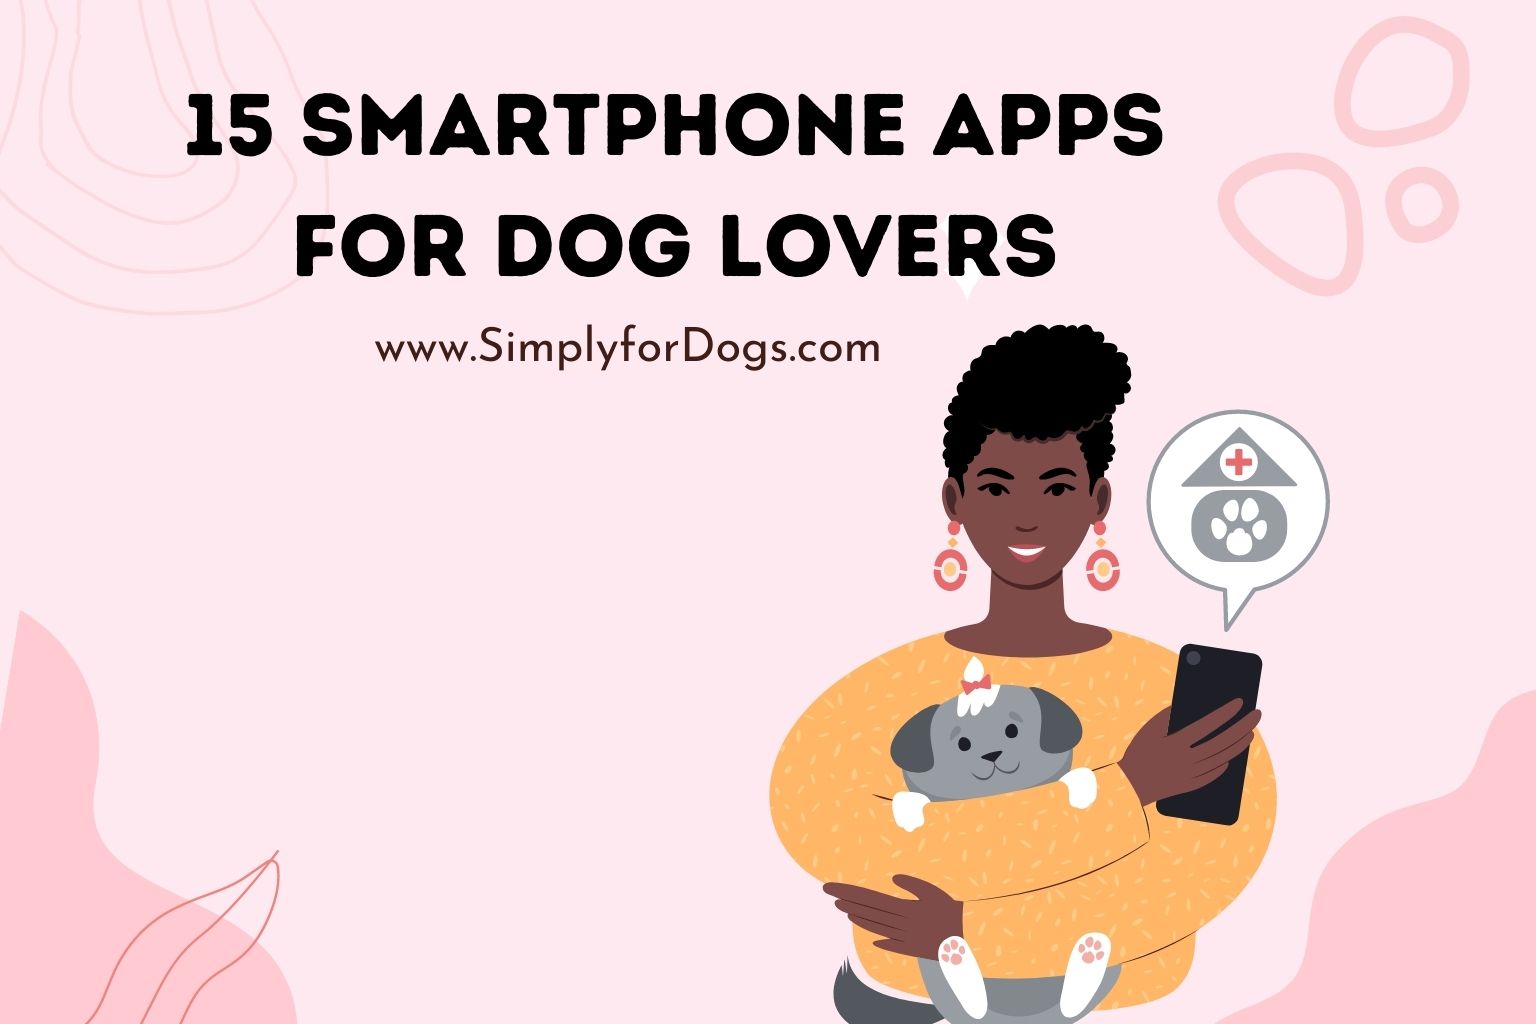 15 Smartphone Apps for Dog Lovers